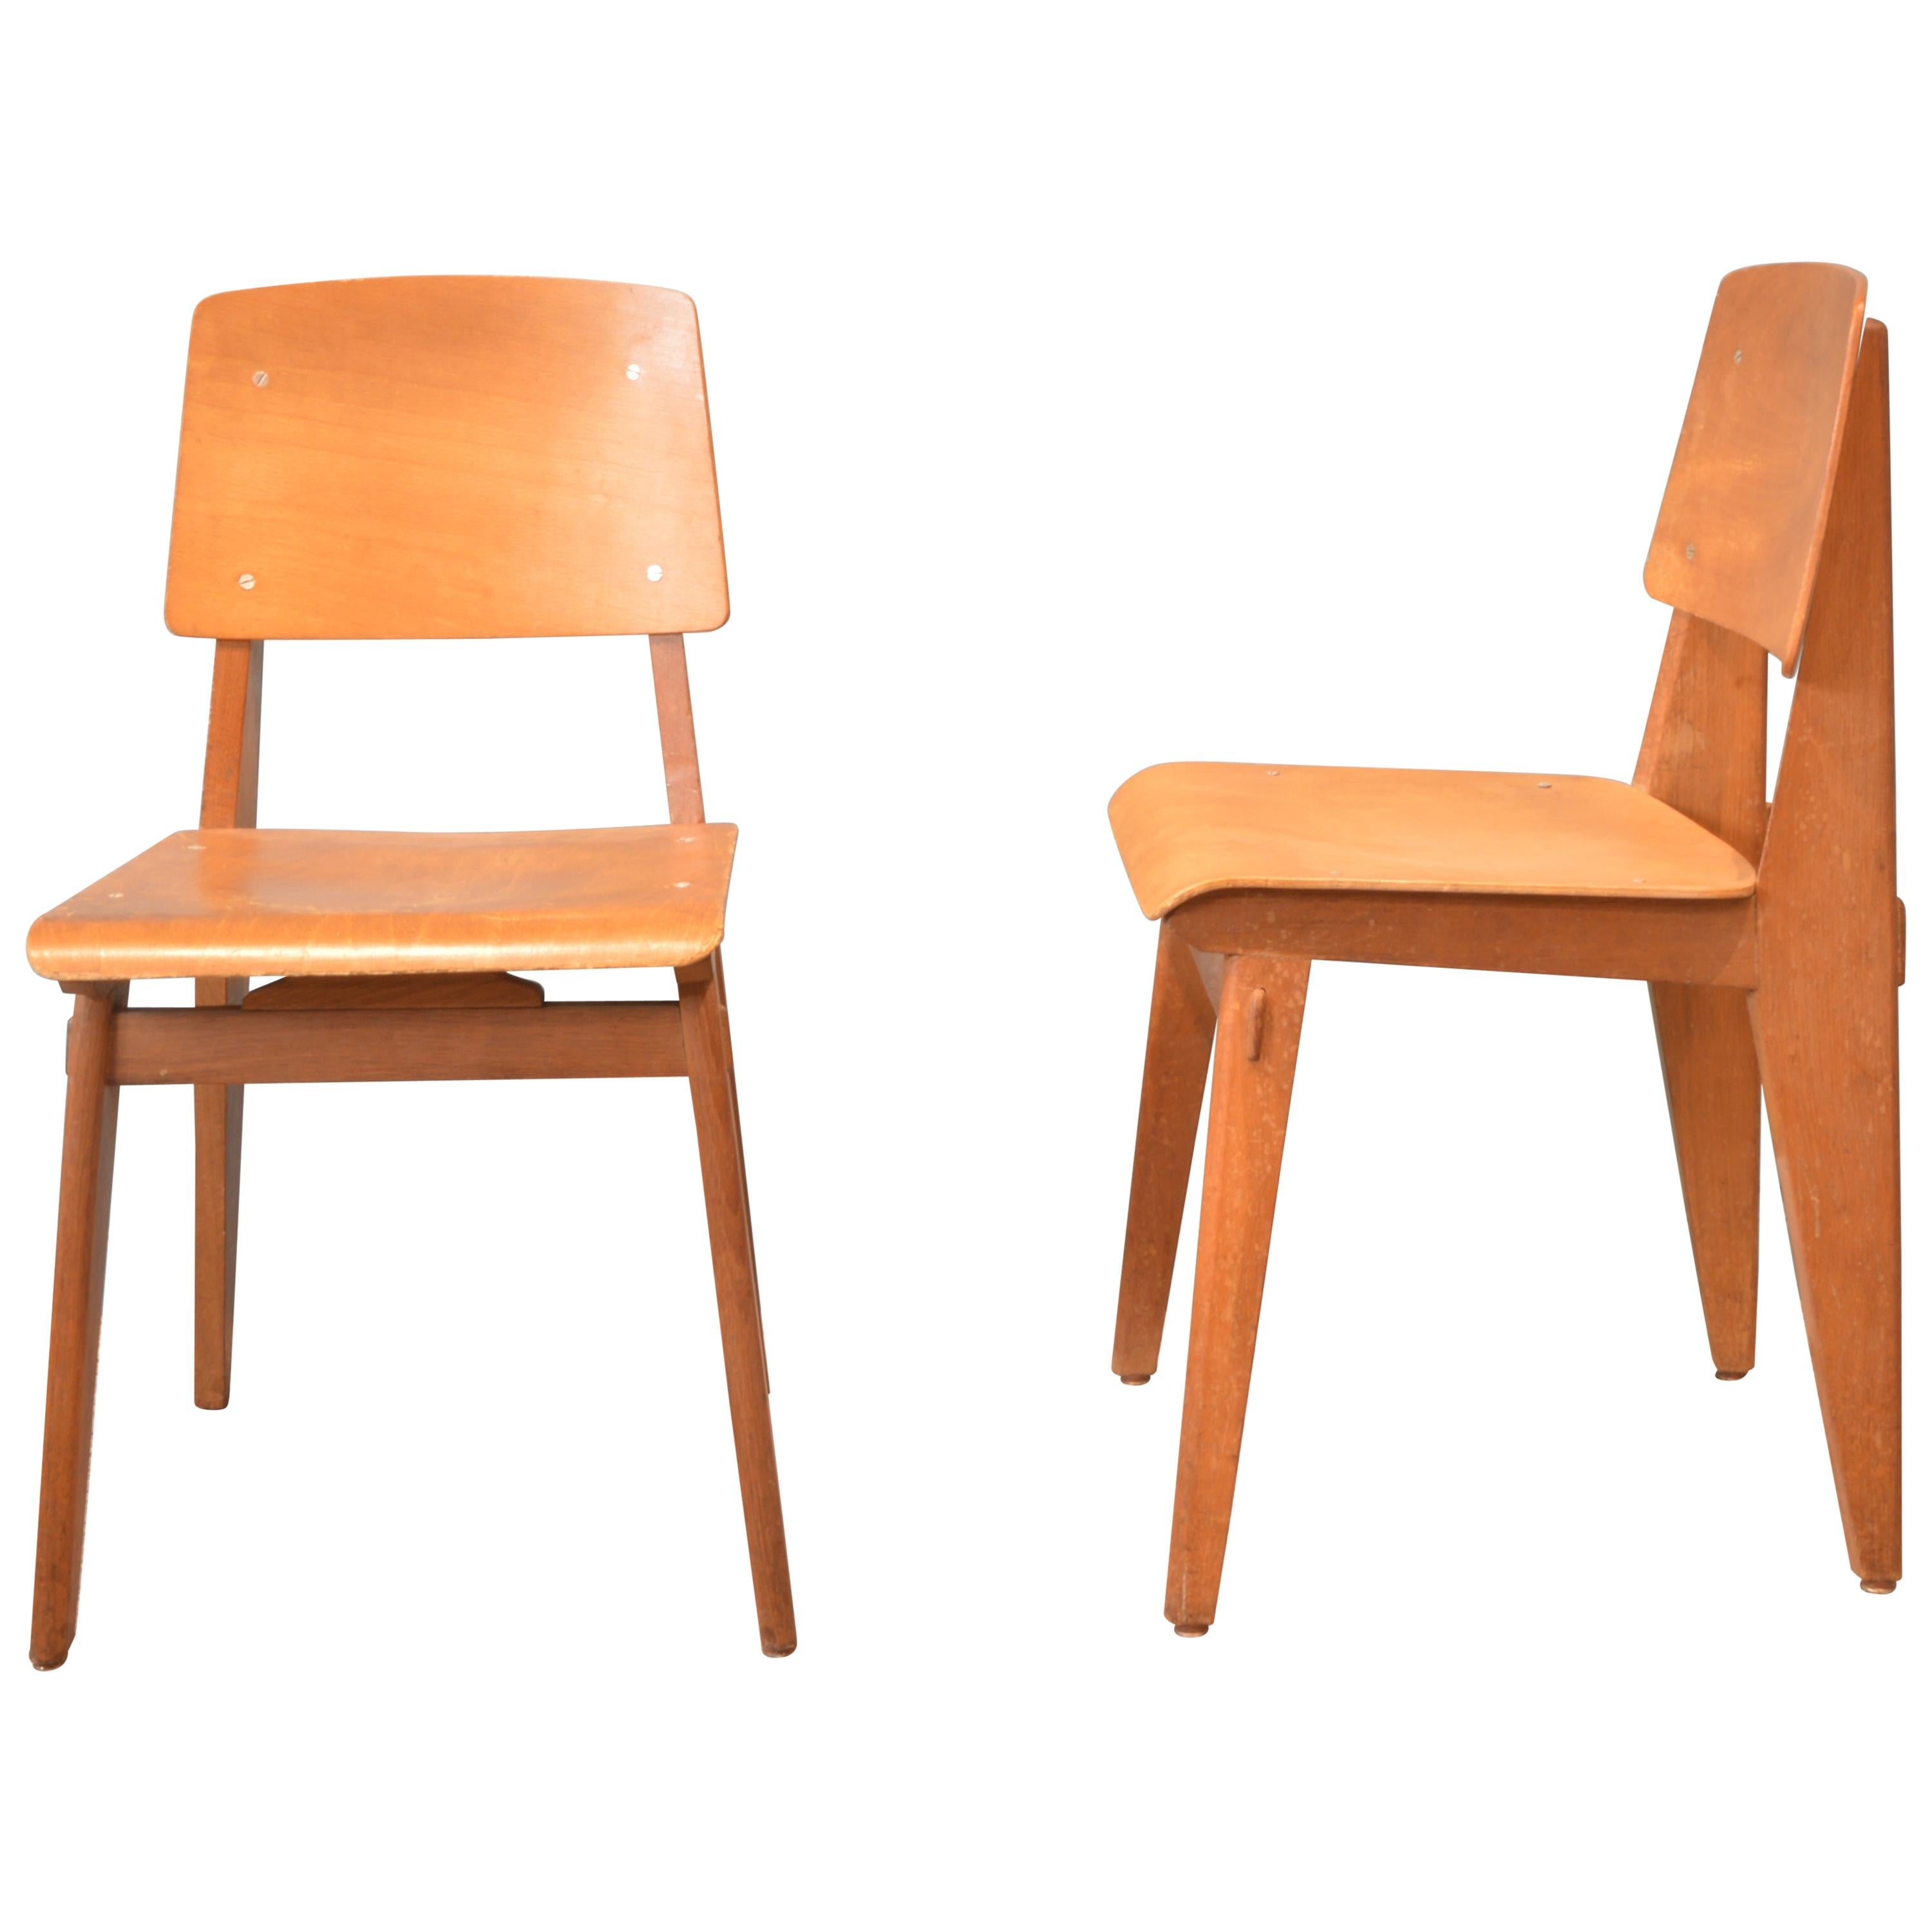 Pair of Chairs by Jean Prouvé